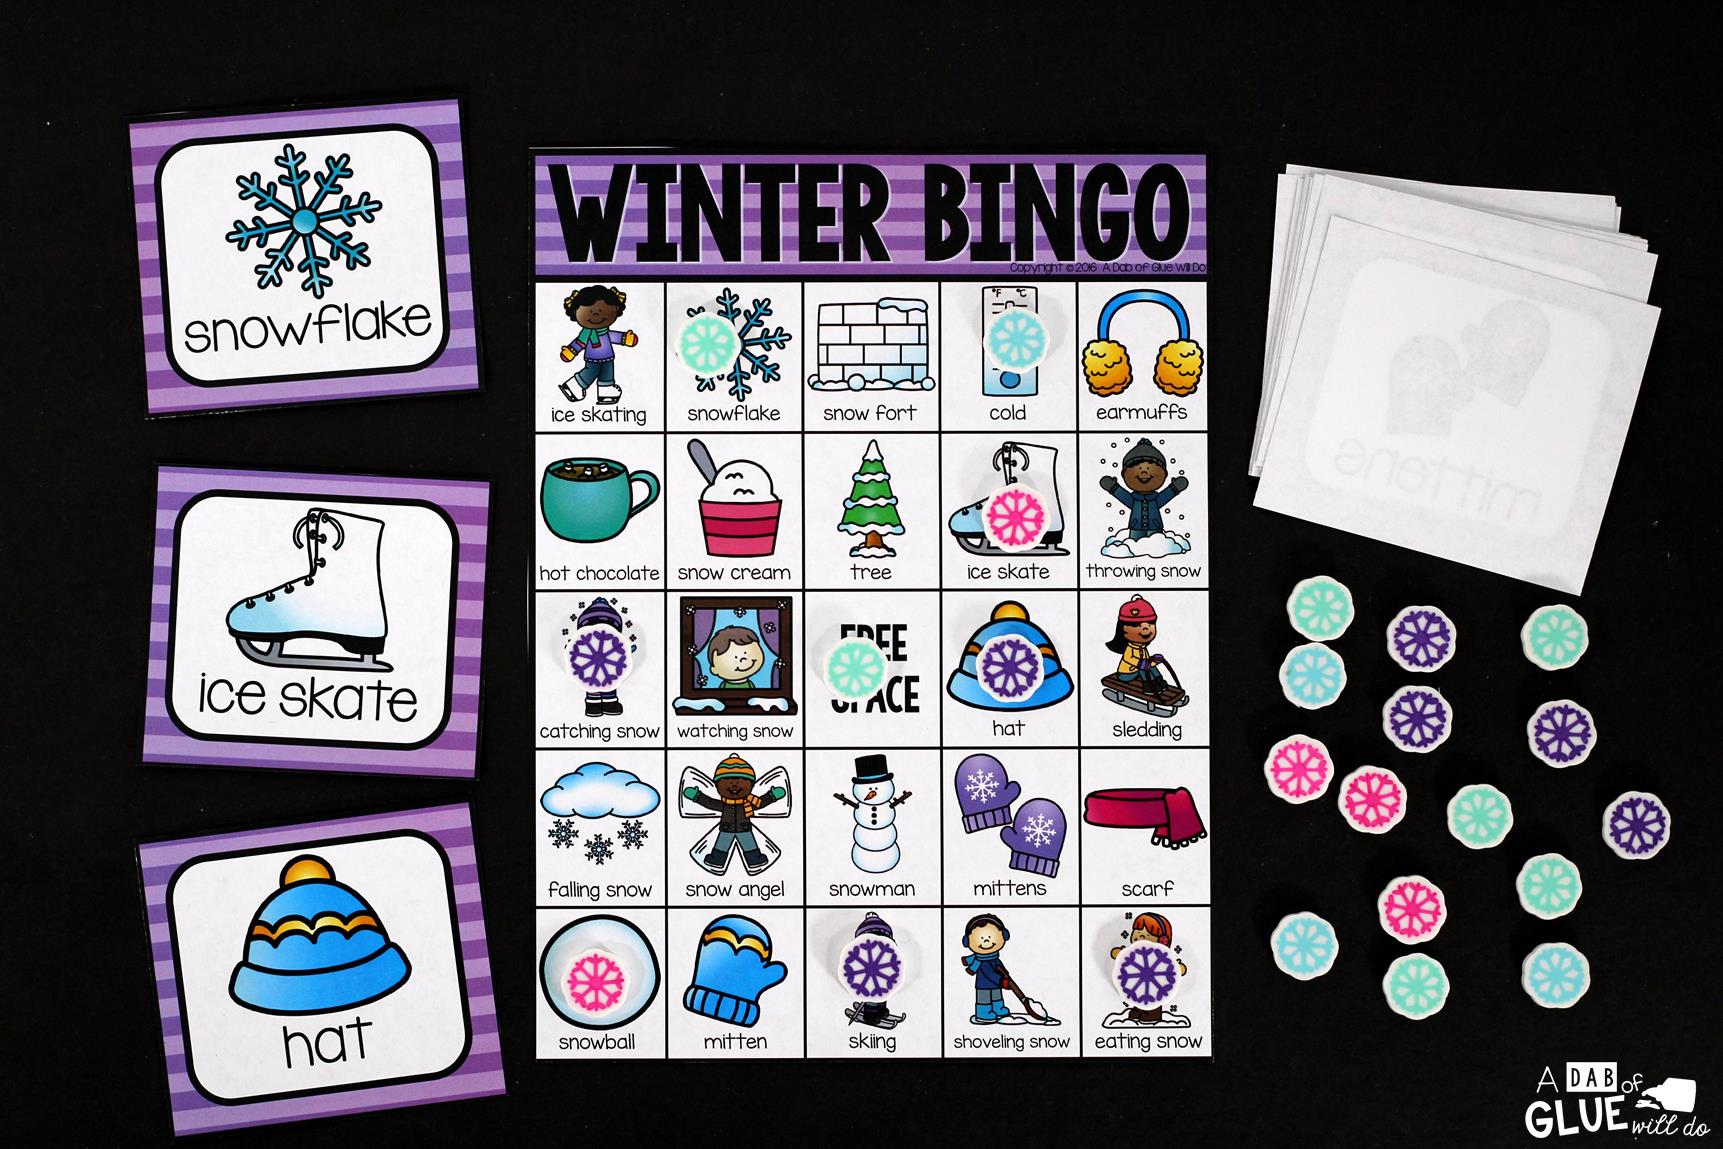 Play Bingo with your elementary age students for a fun winter themed game! Perfect for large groups in your classroom or small review groups. Add this to your winter lesson plans or winter class party with 30 unique winter Bingo boards! Teaching cards are also included in this fun game for young children! Black and white options available to save your color ink.